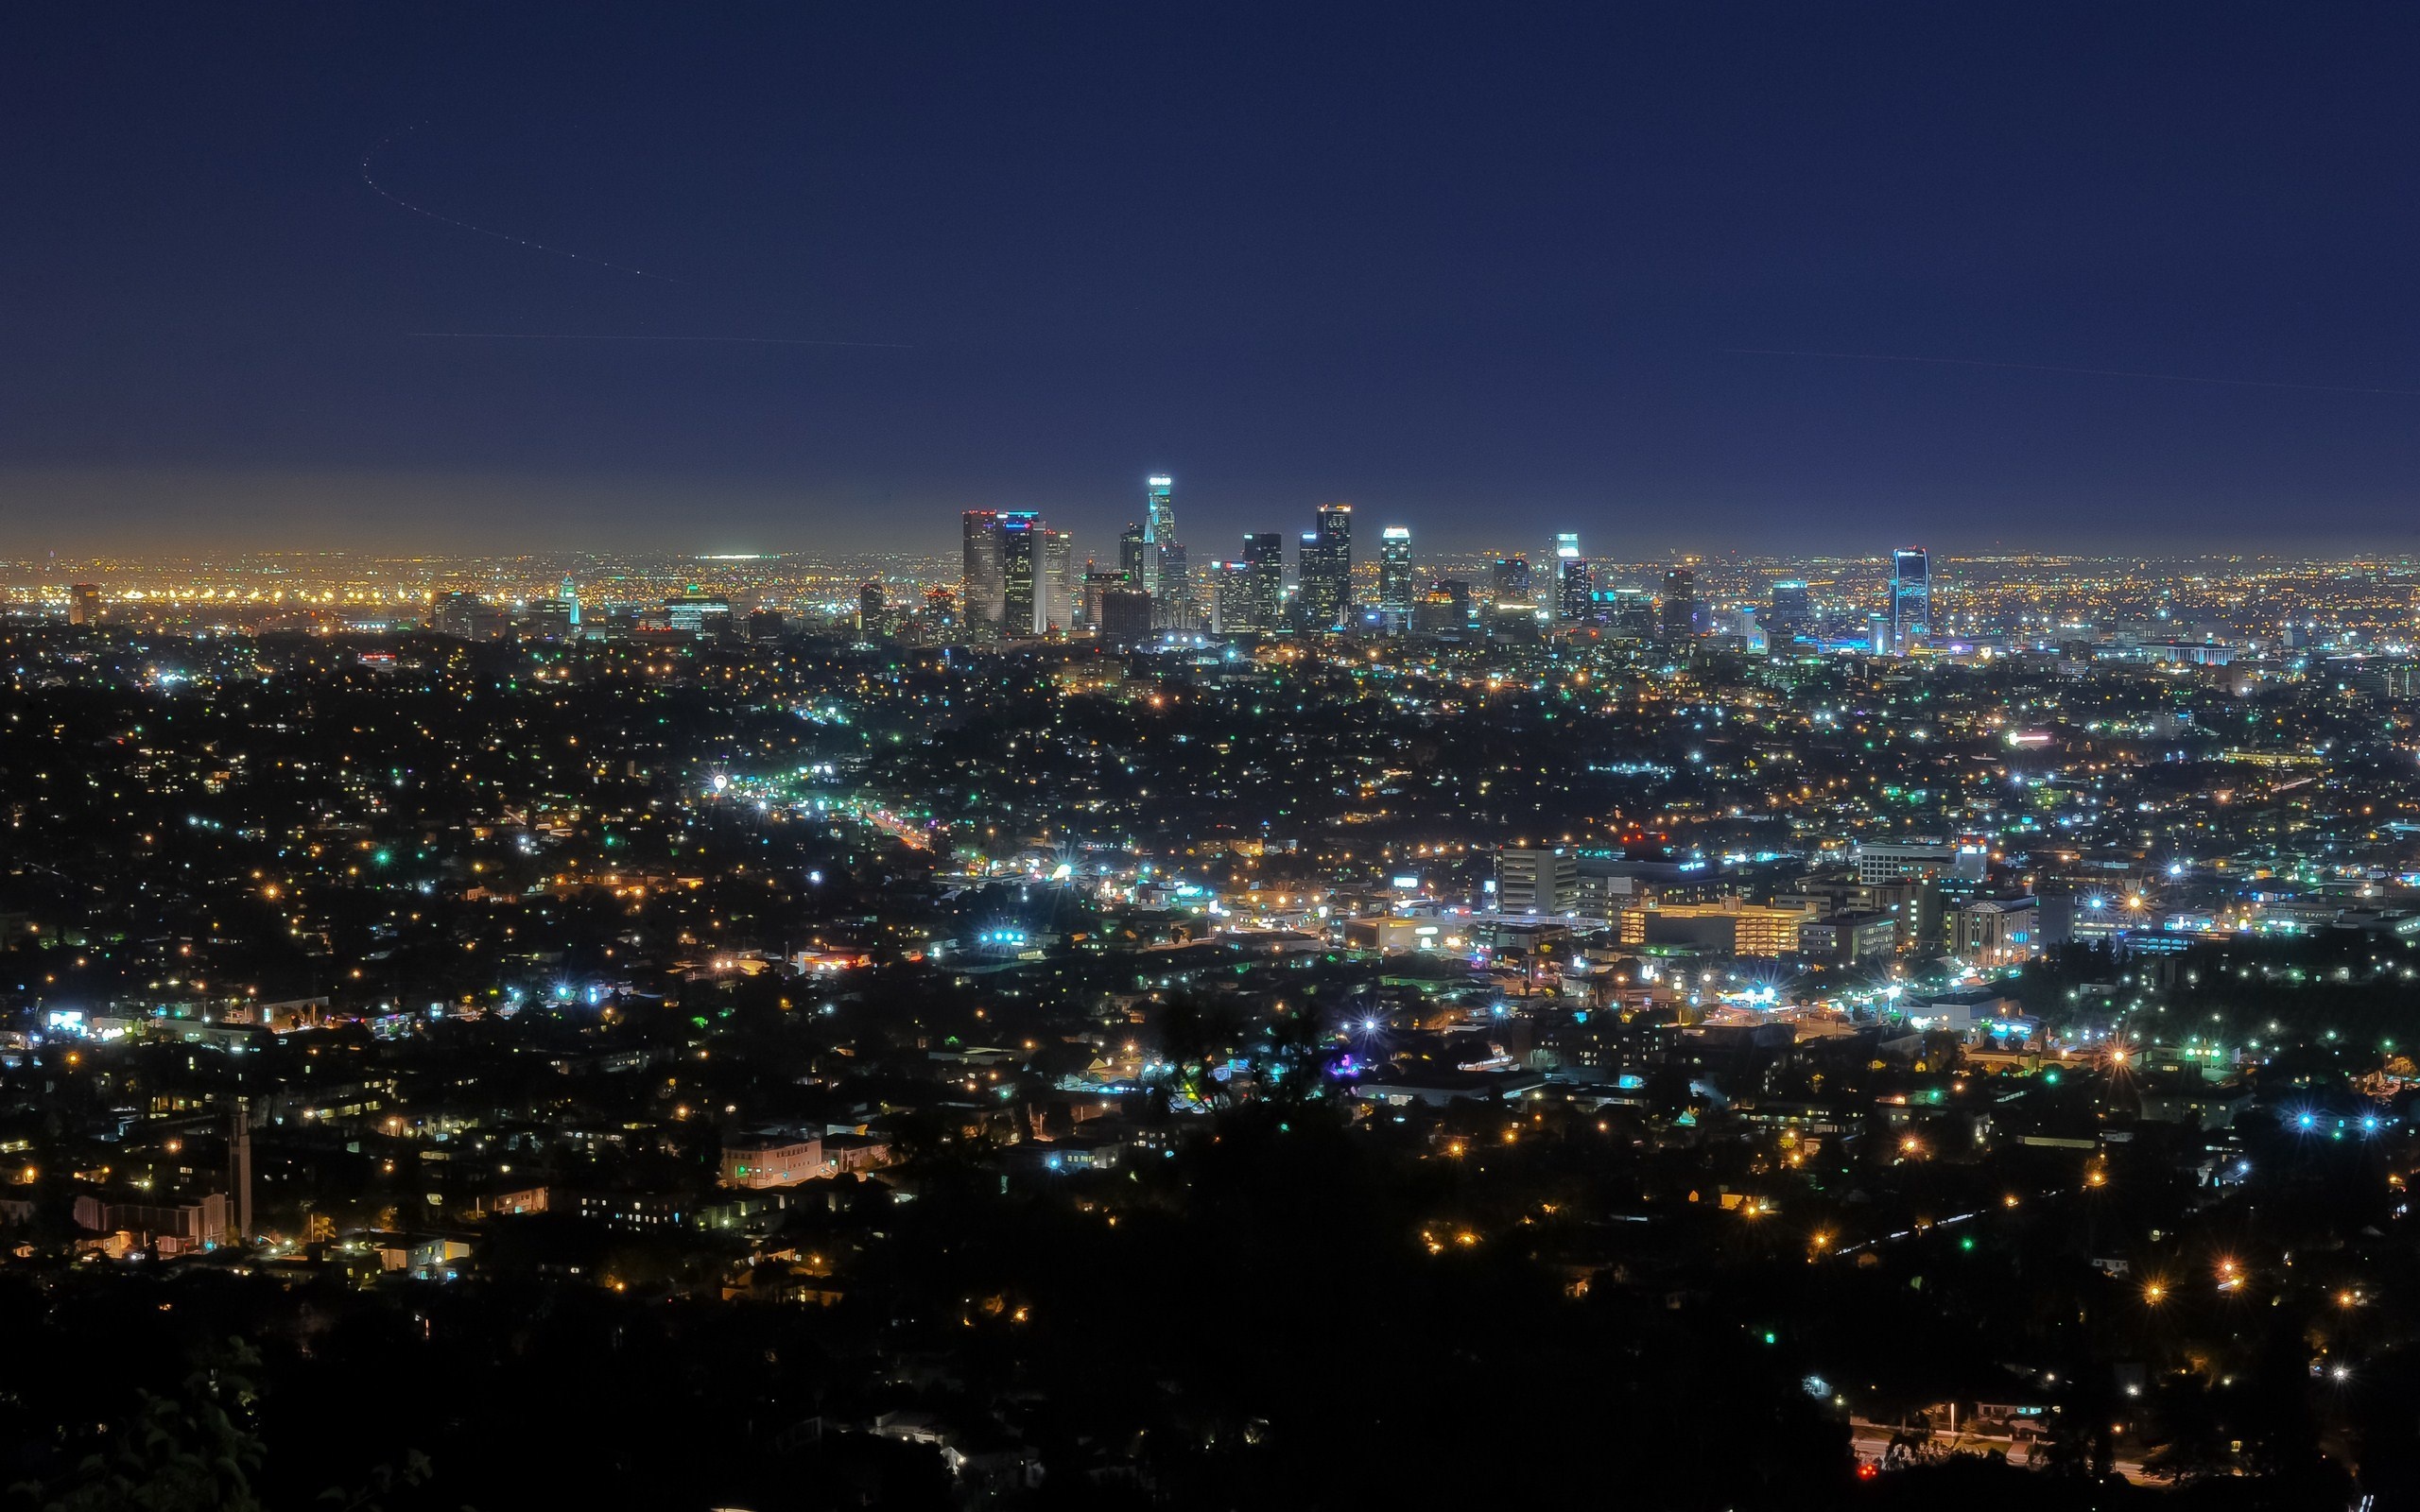 Los Angeles: The second most populous city and metropolitan area in the United States. 2560x1600 HD Wallpaper.